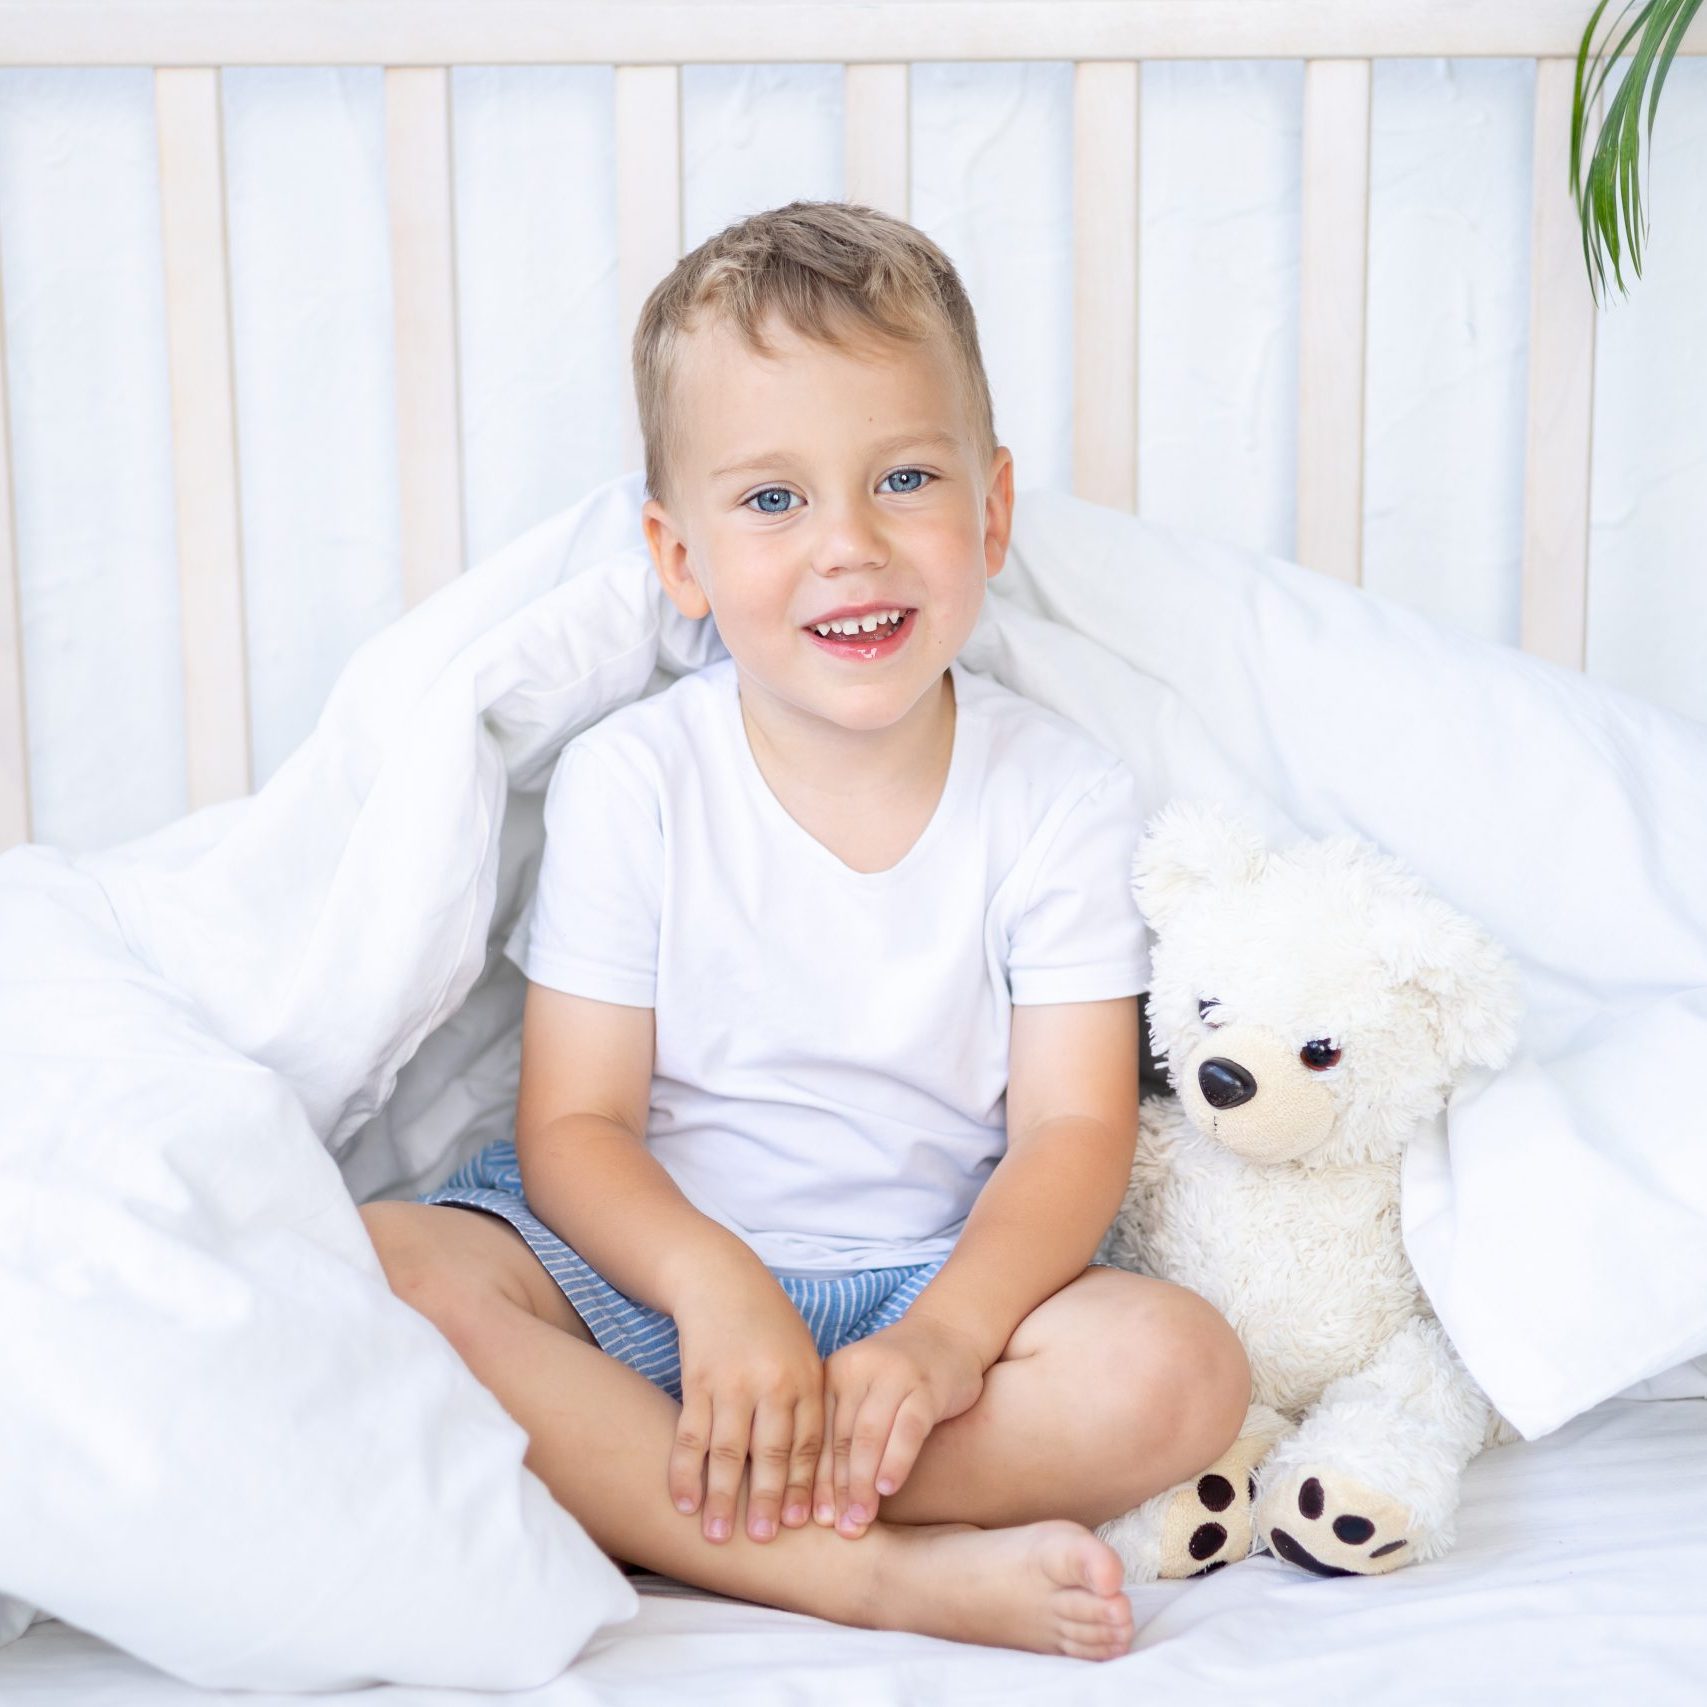 a small child boy lies in a crib with a teddy bear on white bed linen, a child's dream, smiles, looks at the camera